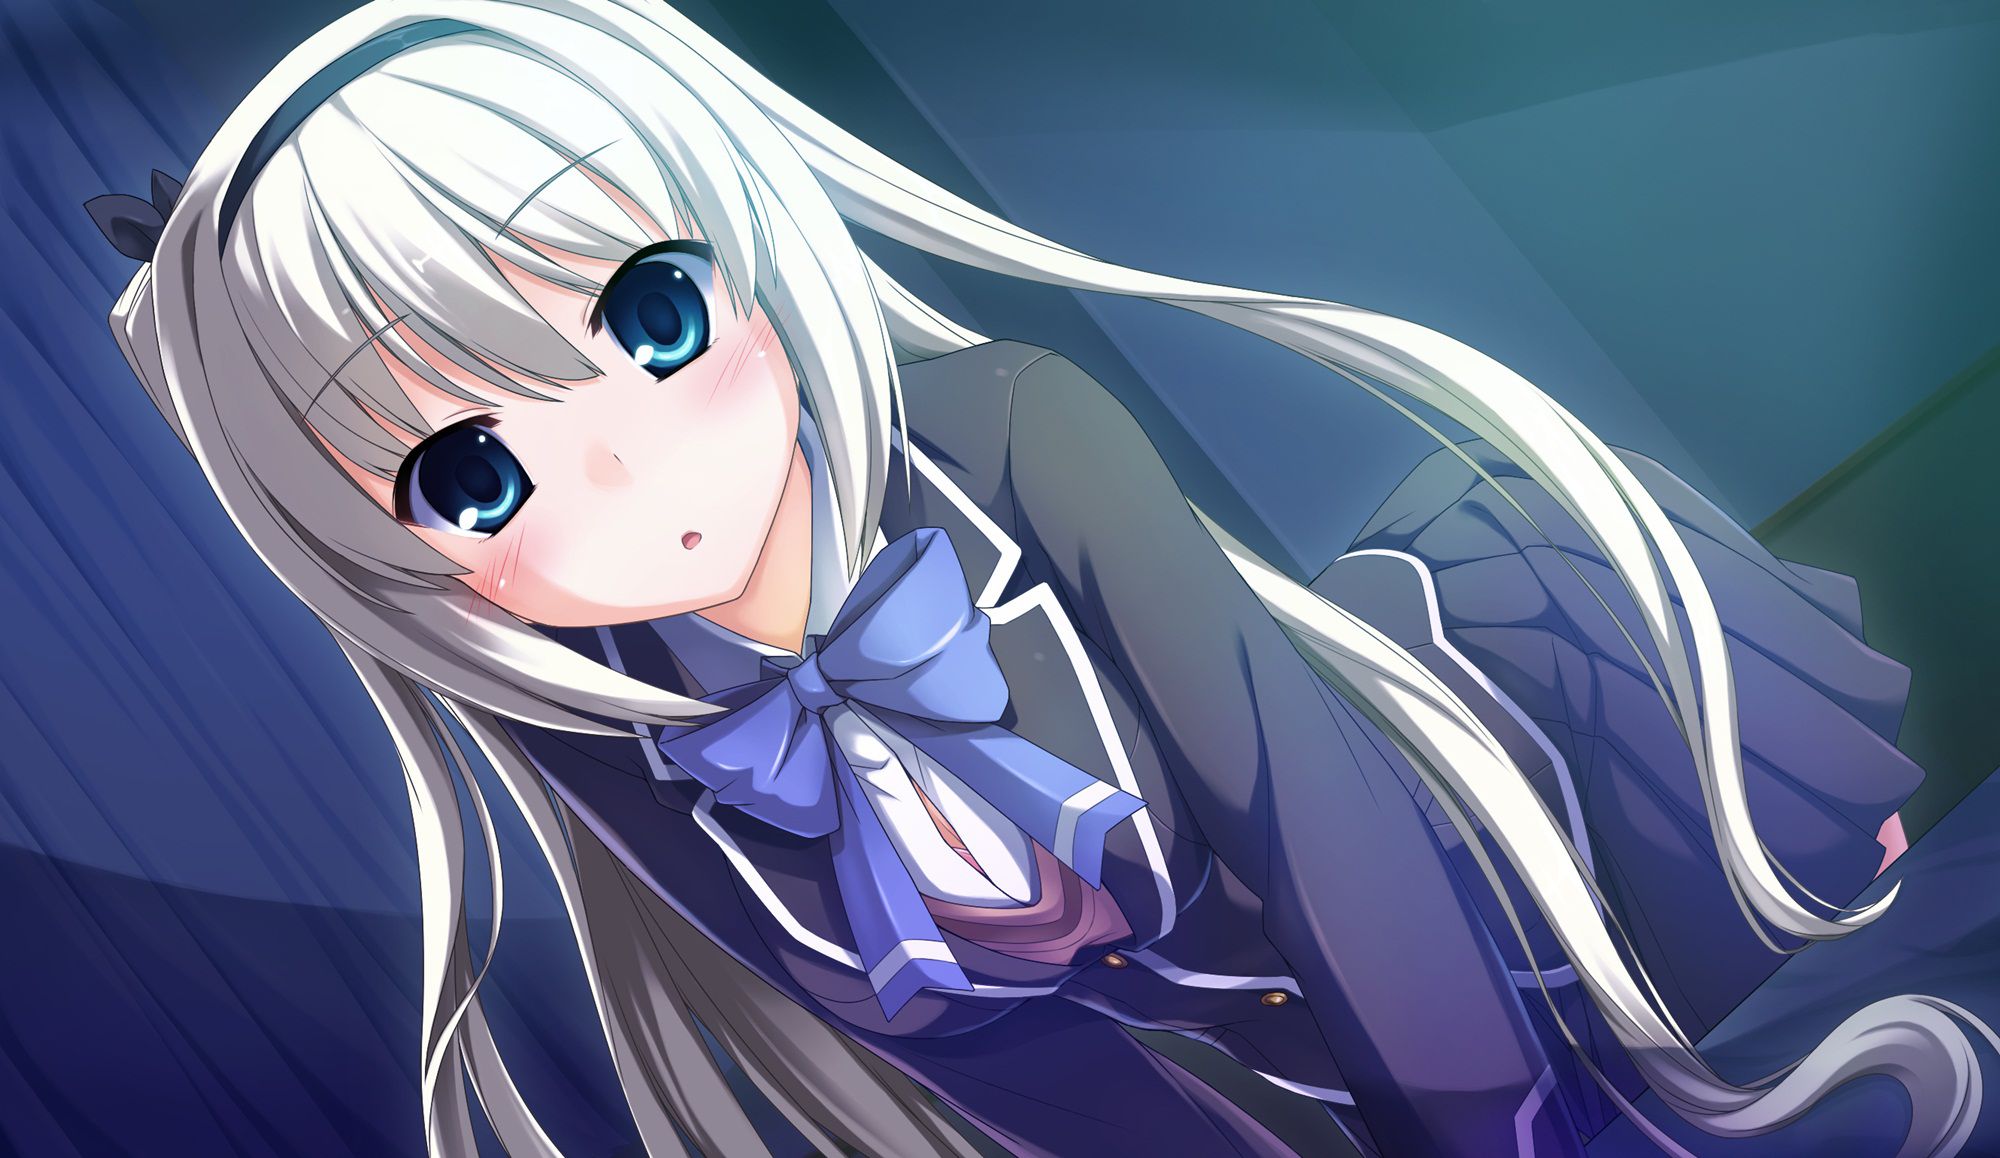 SINCLIENT (thin client) [under age 18 prohibited eroge CG] erotic wallpapers, images 2